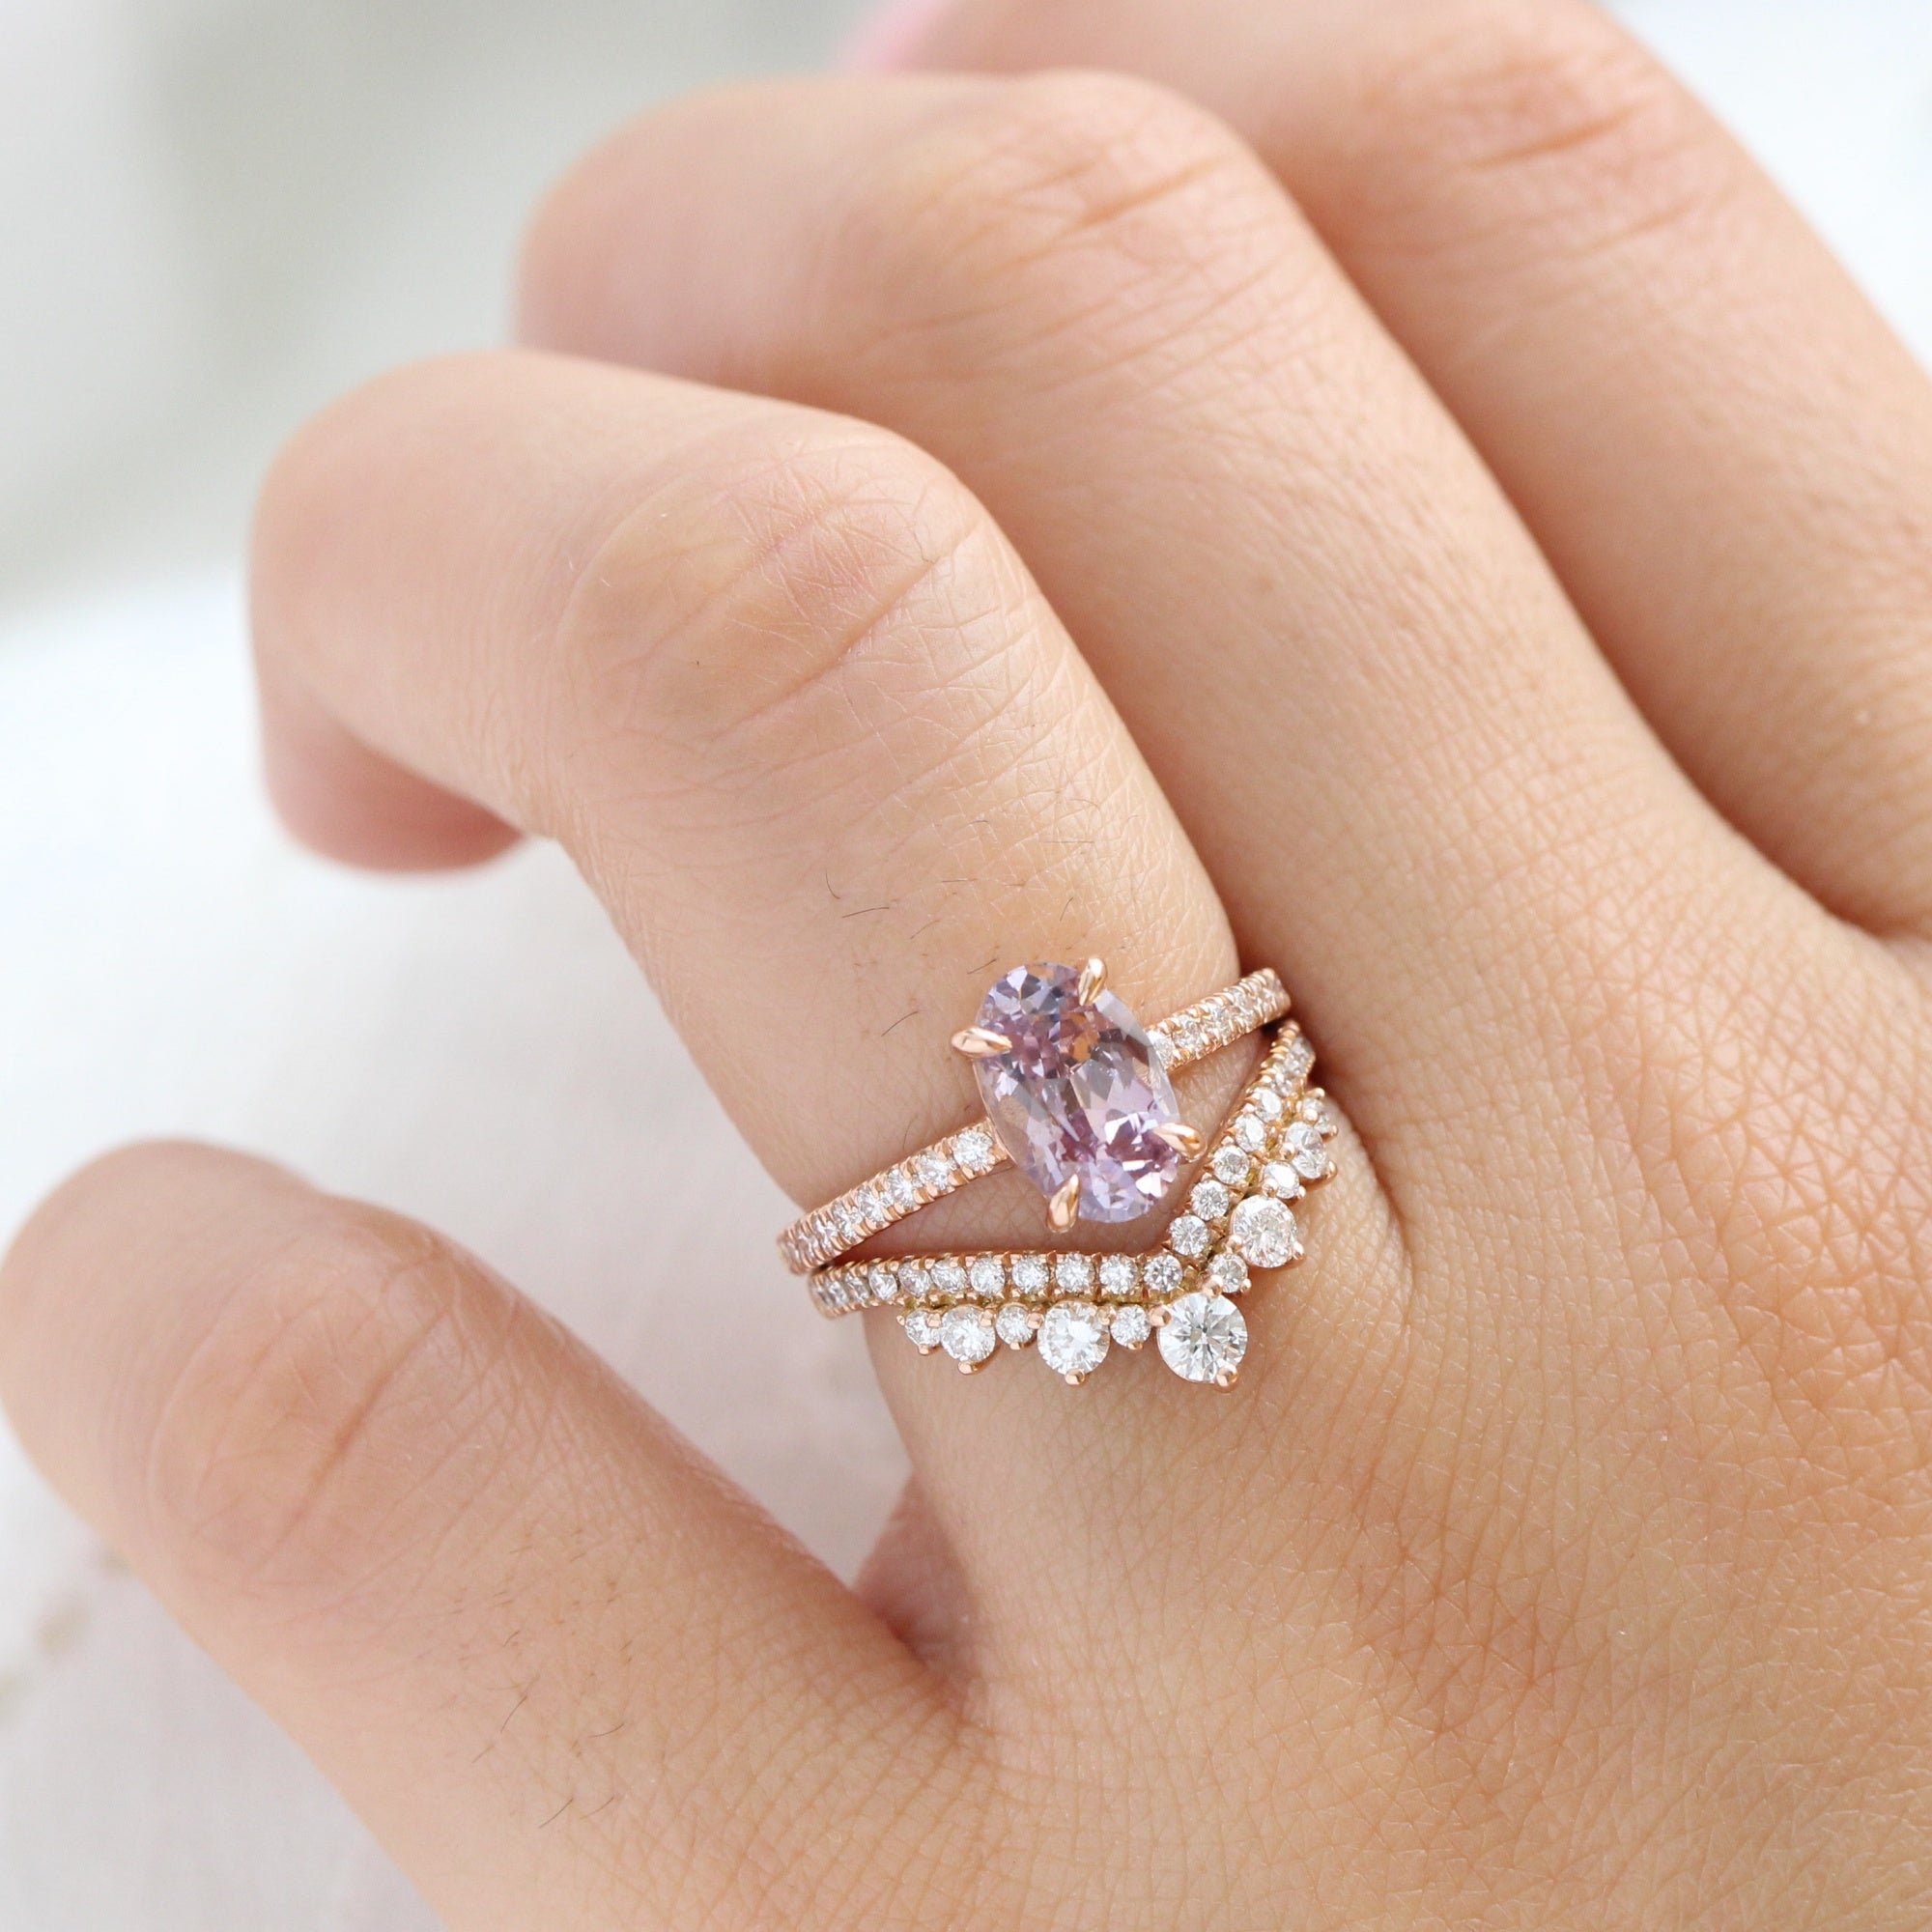 elongated oval lavender sapphire ring rose gold solitaire ring pave band la more design jewelry